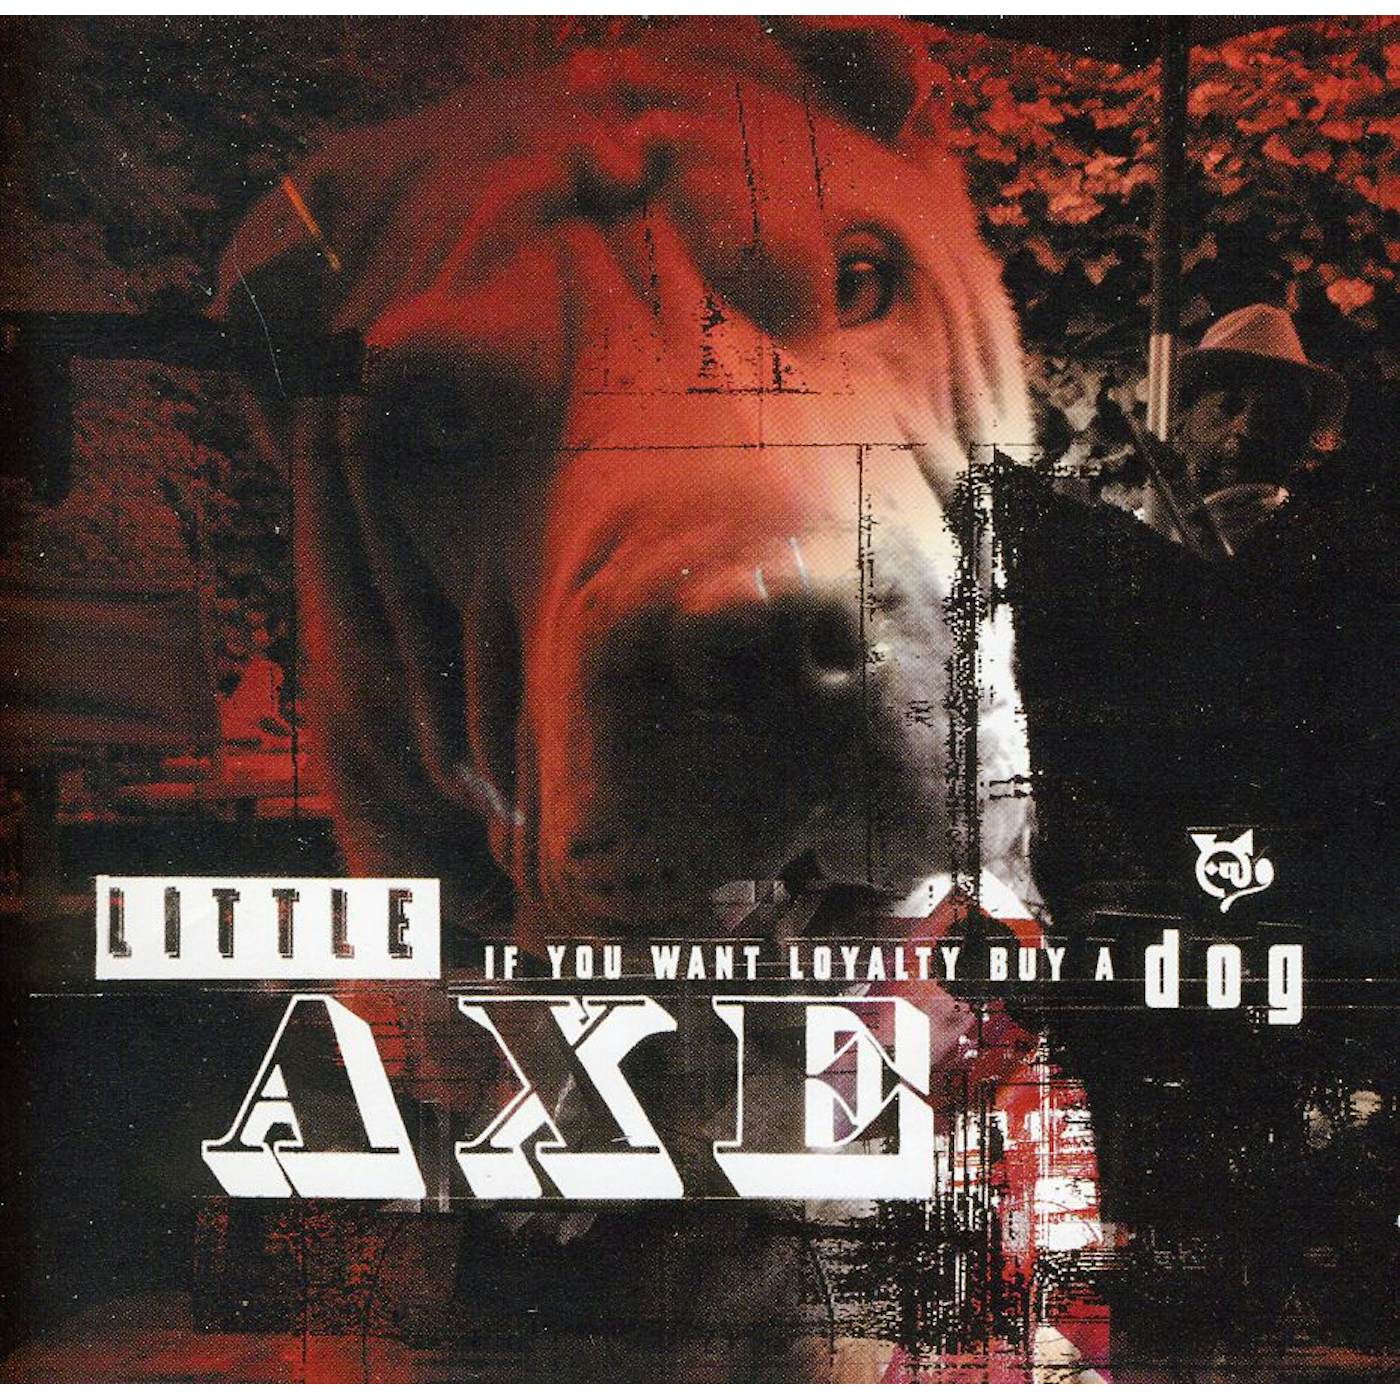 Little Axe IF YOU WANT LOYALTY BUY A DOG CD